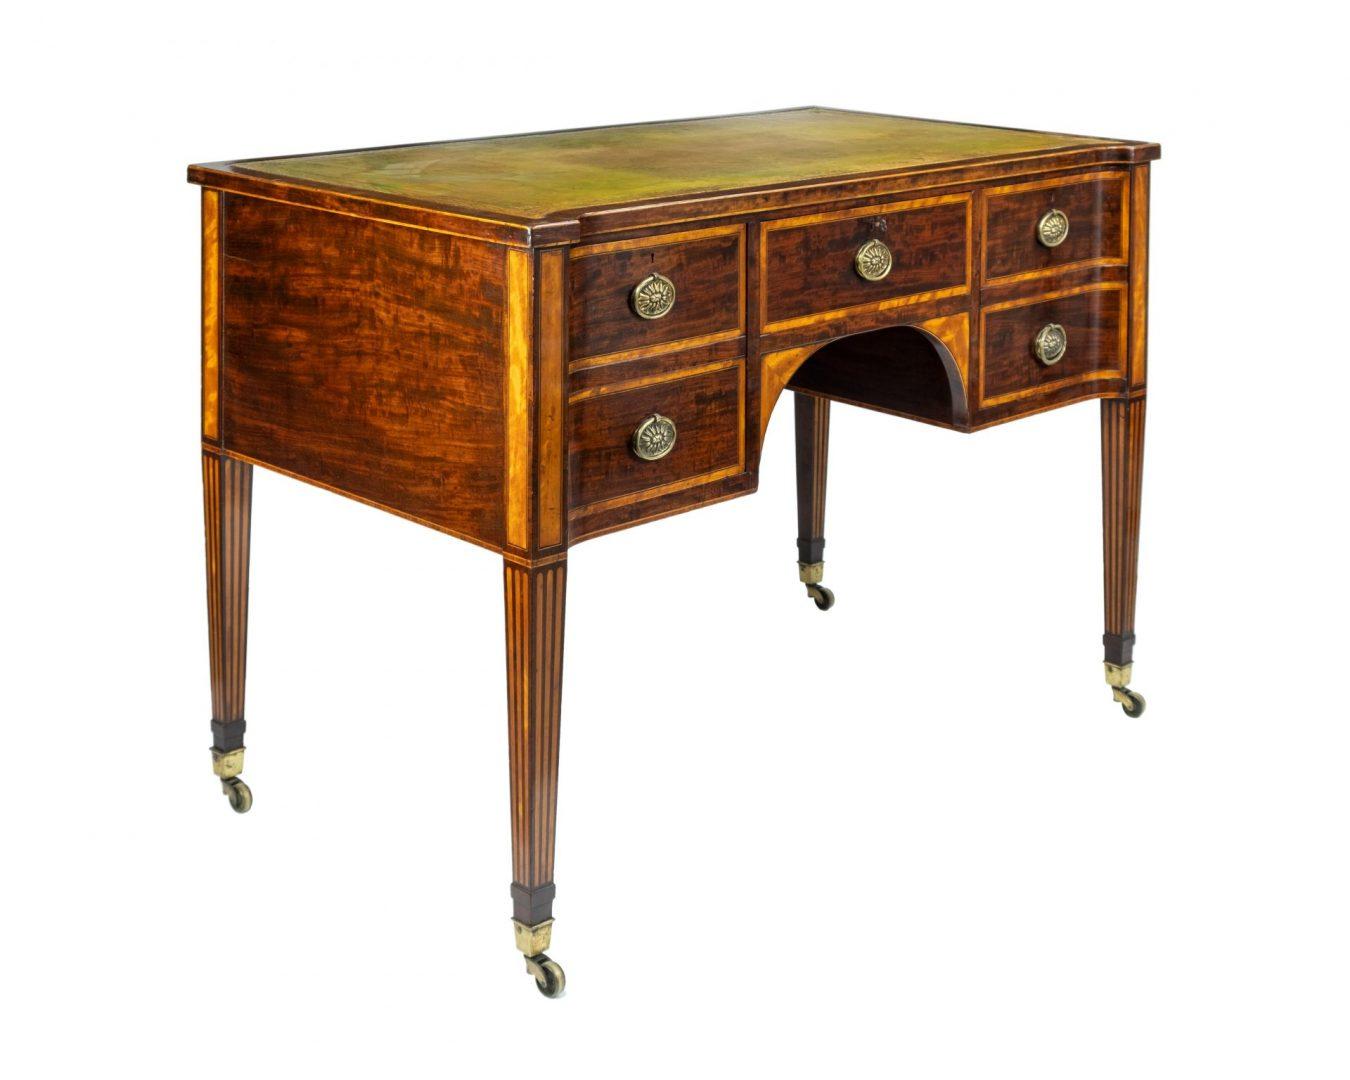 British 19th Century Figured Mahogany Writing Desk by Wright and Mansfield For Sale